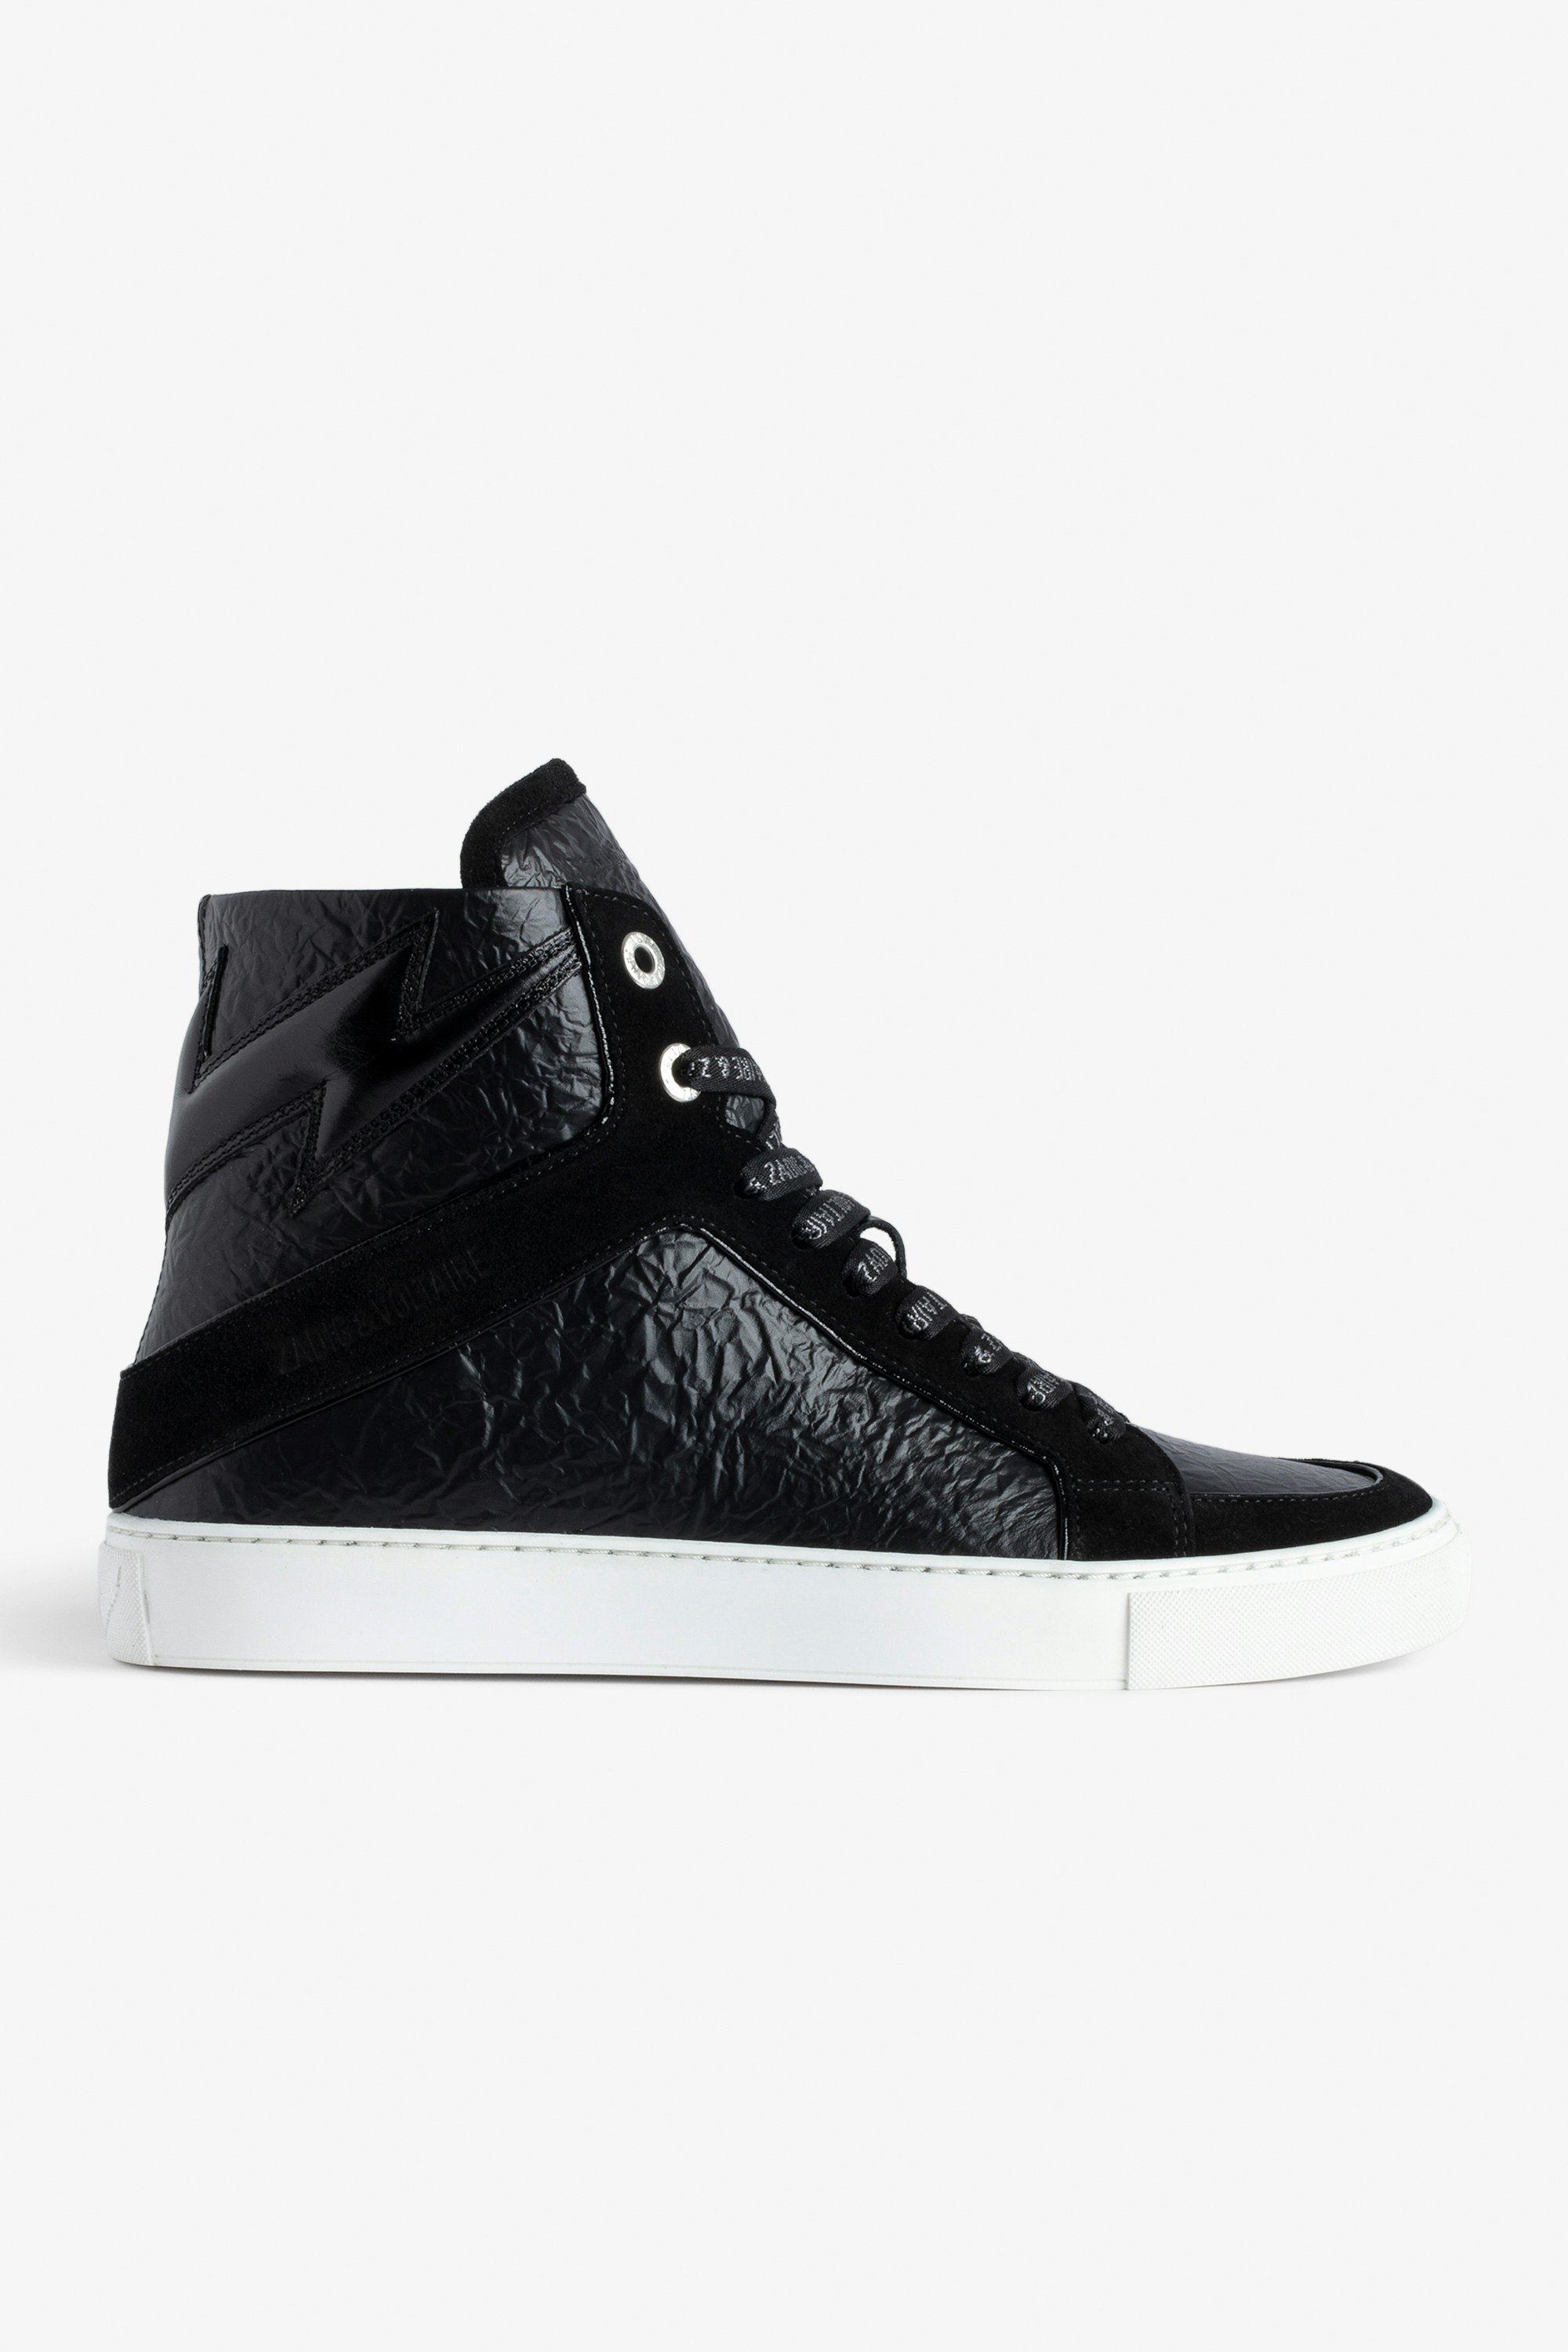 ZV1747 High Flash High-Top Trainers Women’s black distressed leather high-top trainers with lightning bolt and suede panels.